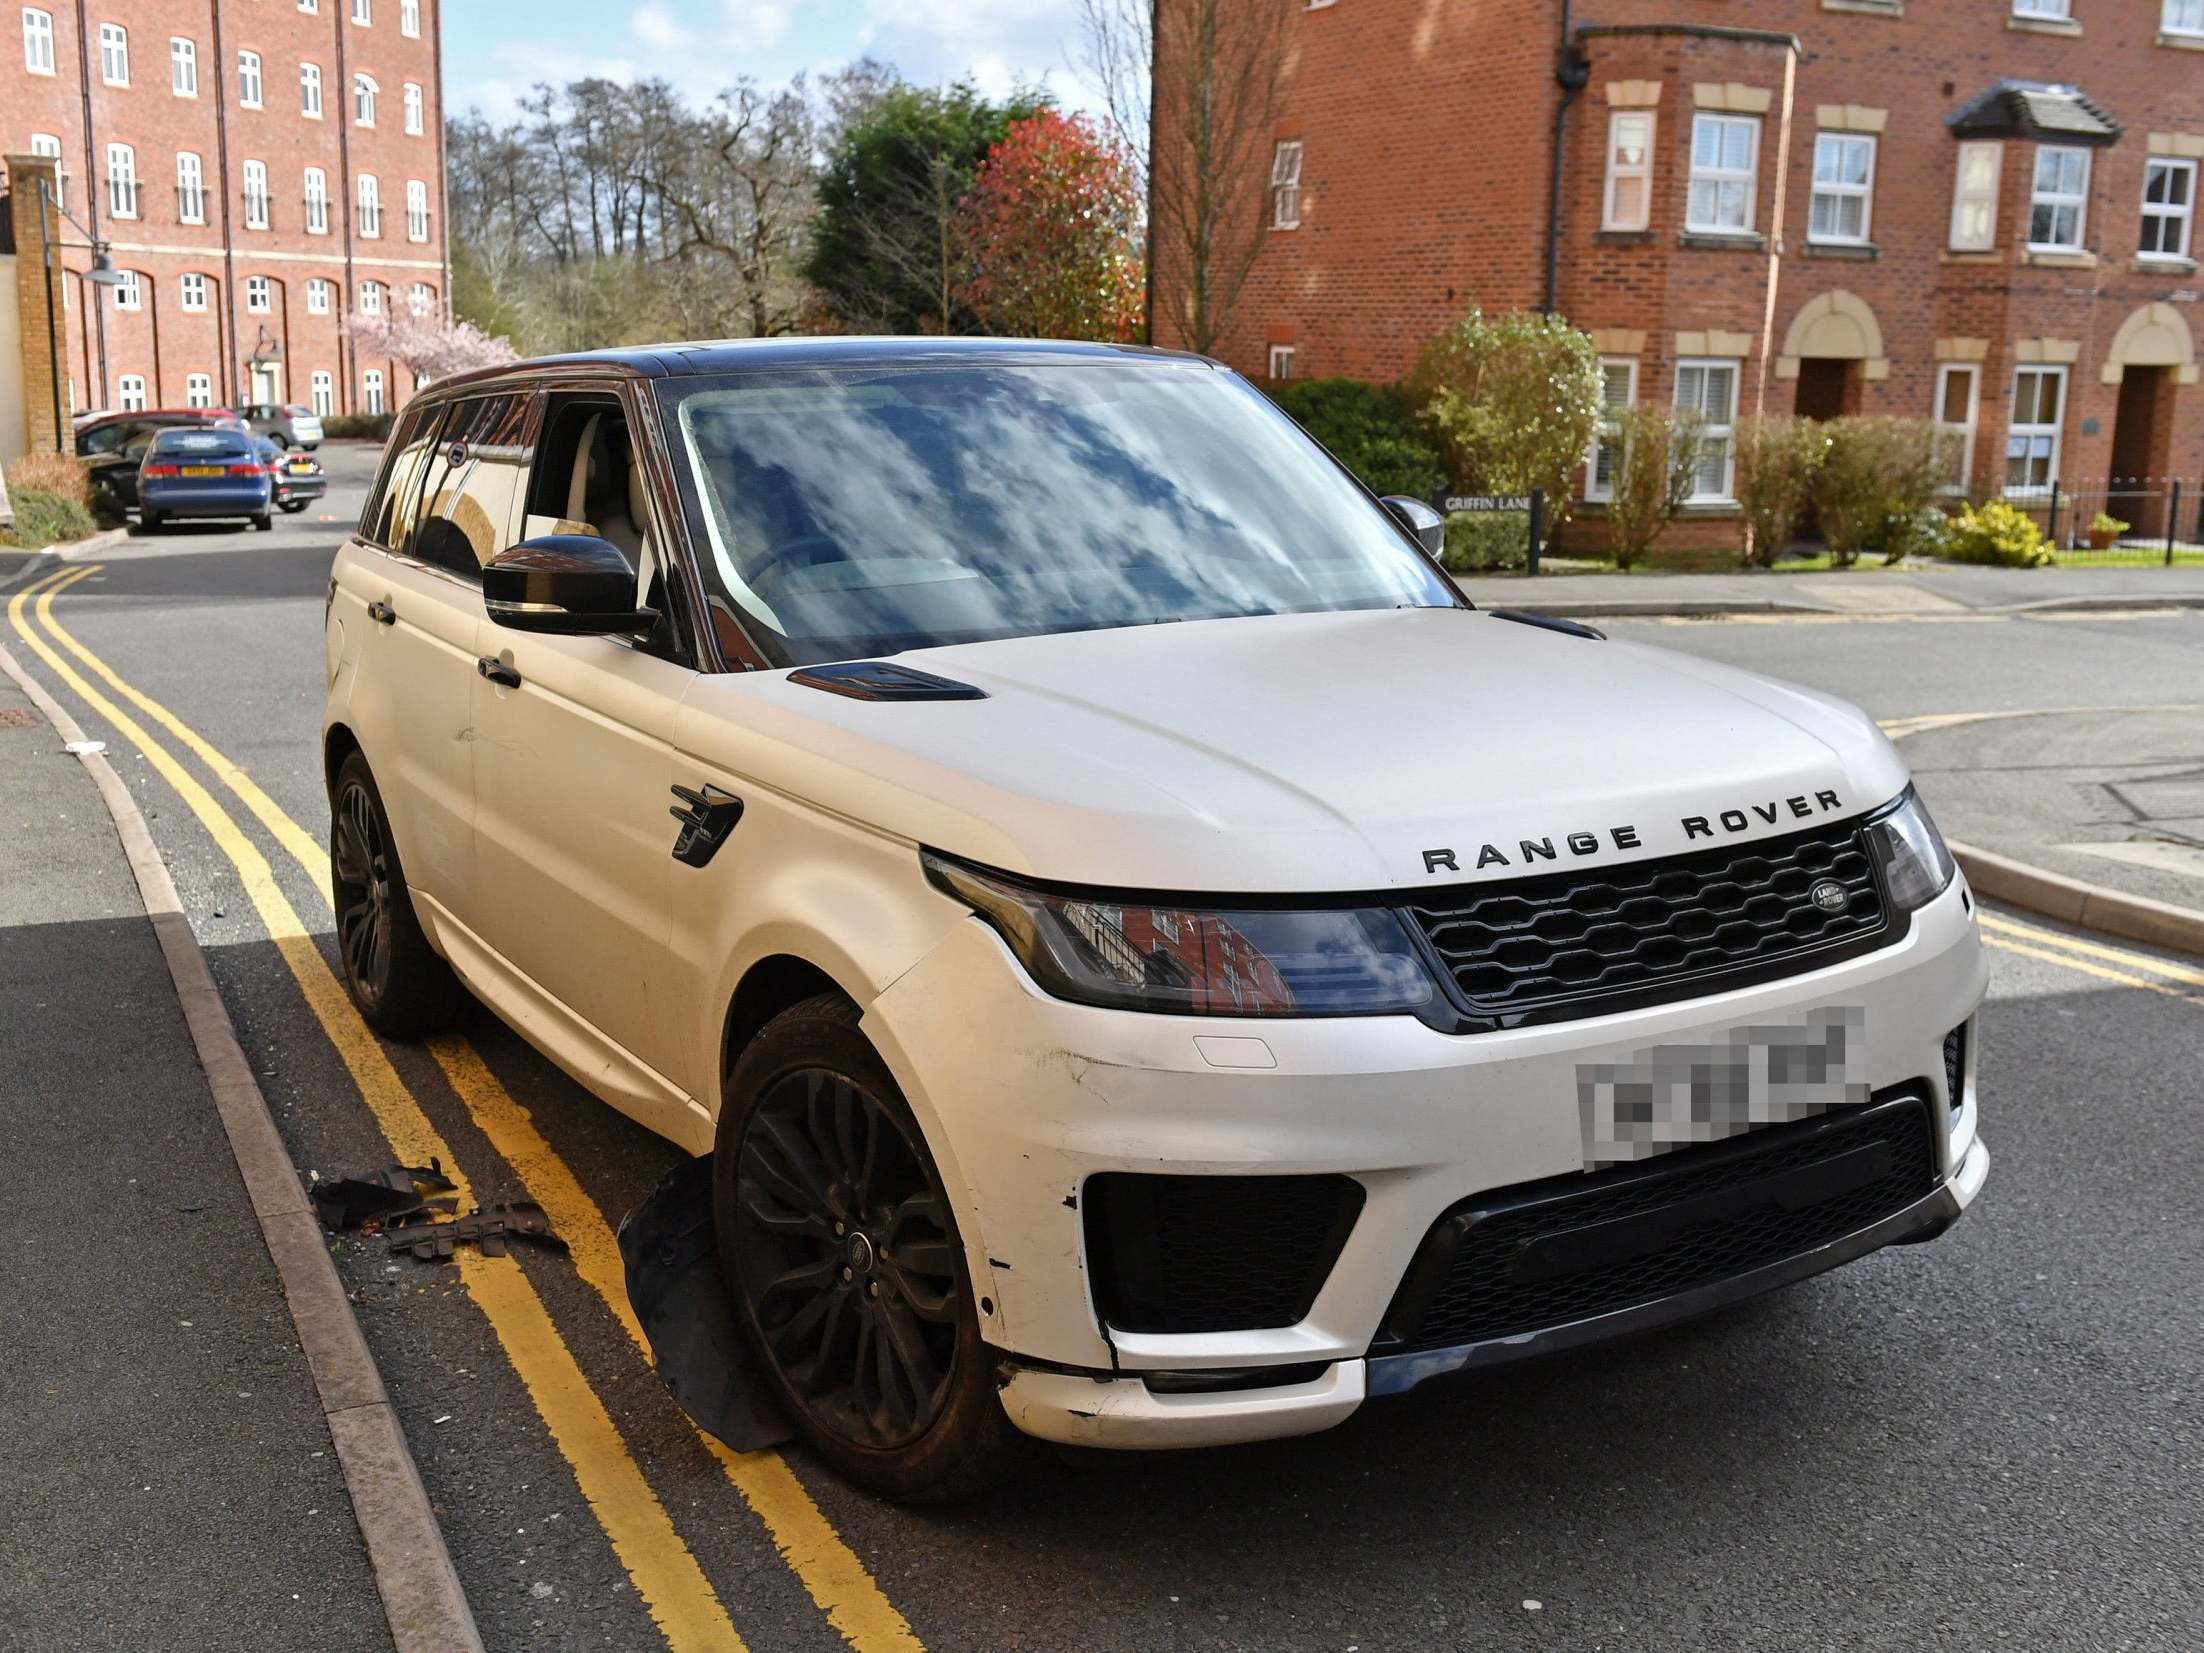 Grealish’s Range Rover was seen hitting two other vehicles